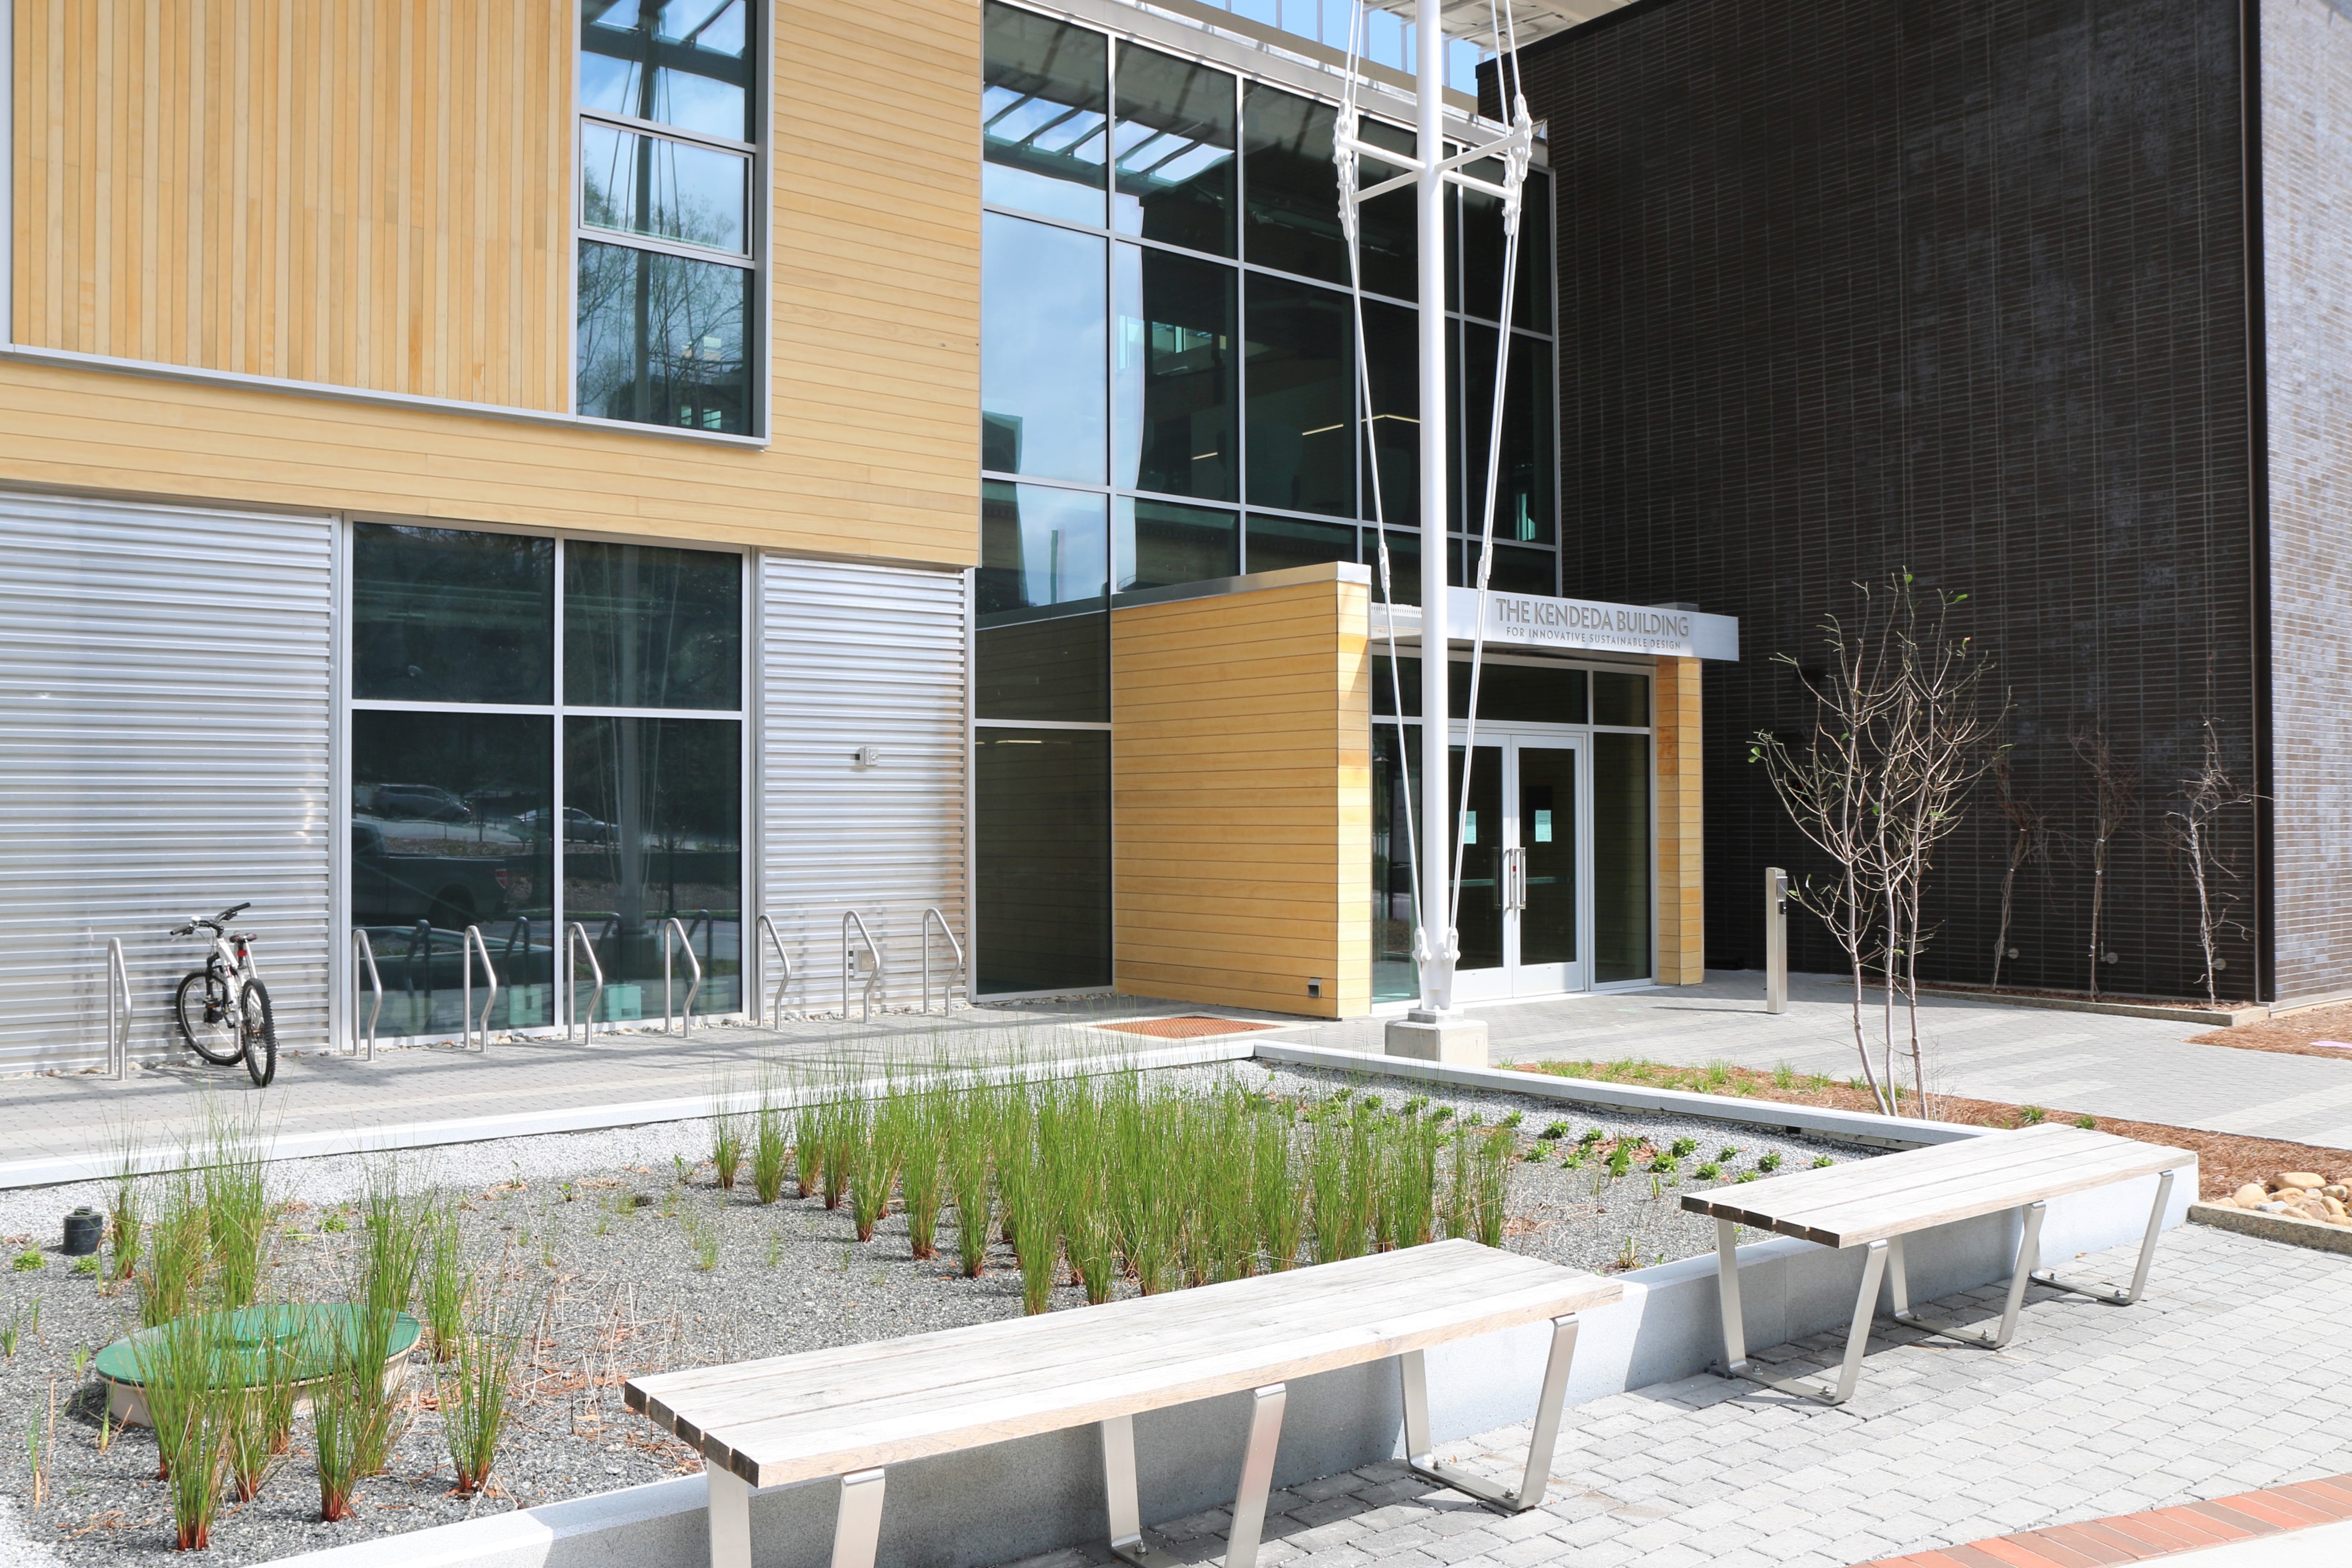 The Kendeda Building's constructed wetland is a natural method to treat greywater that also provides an amenity for people visiting the building and passersby.